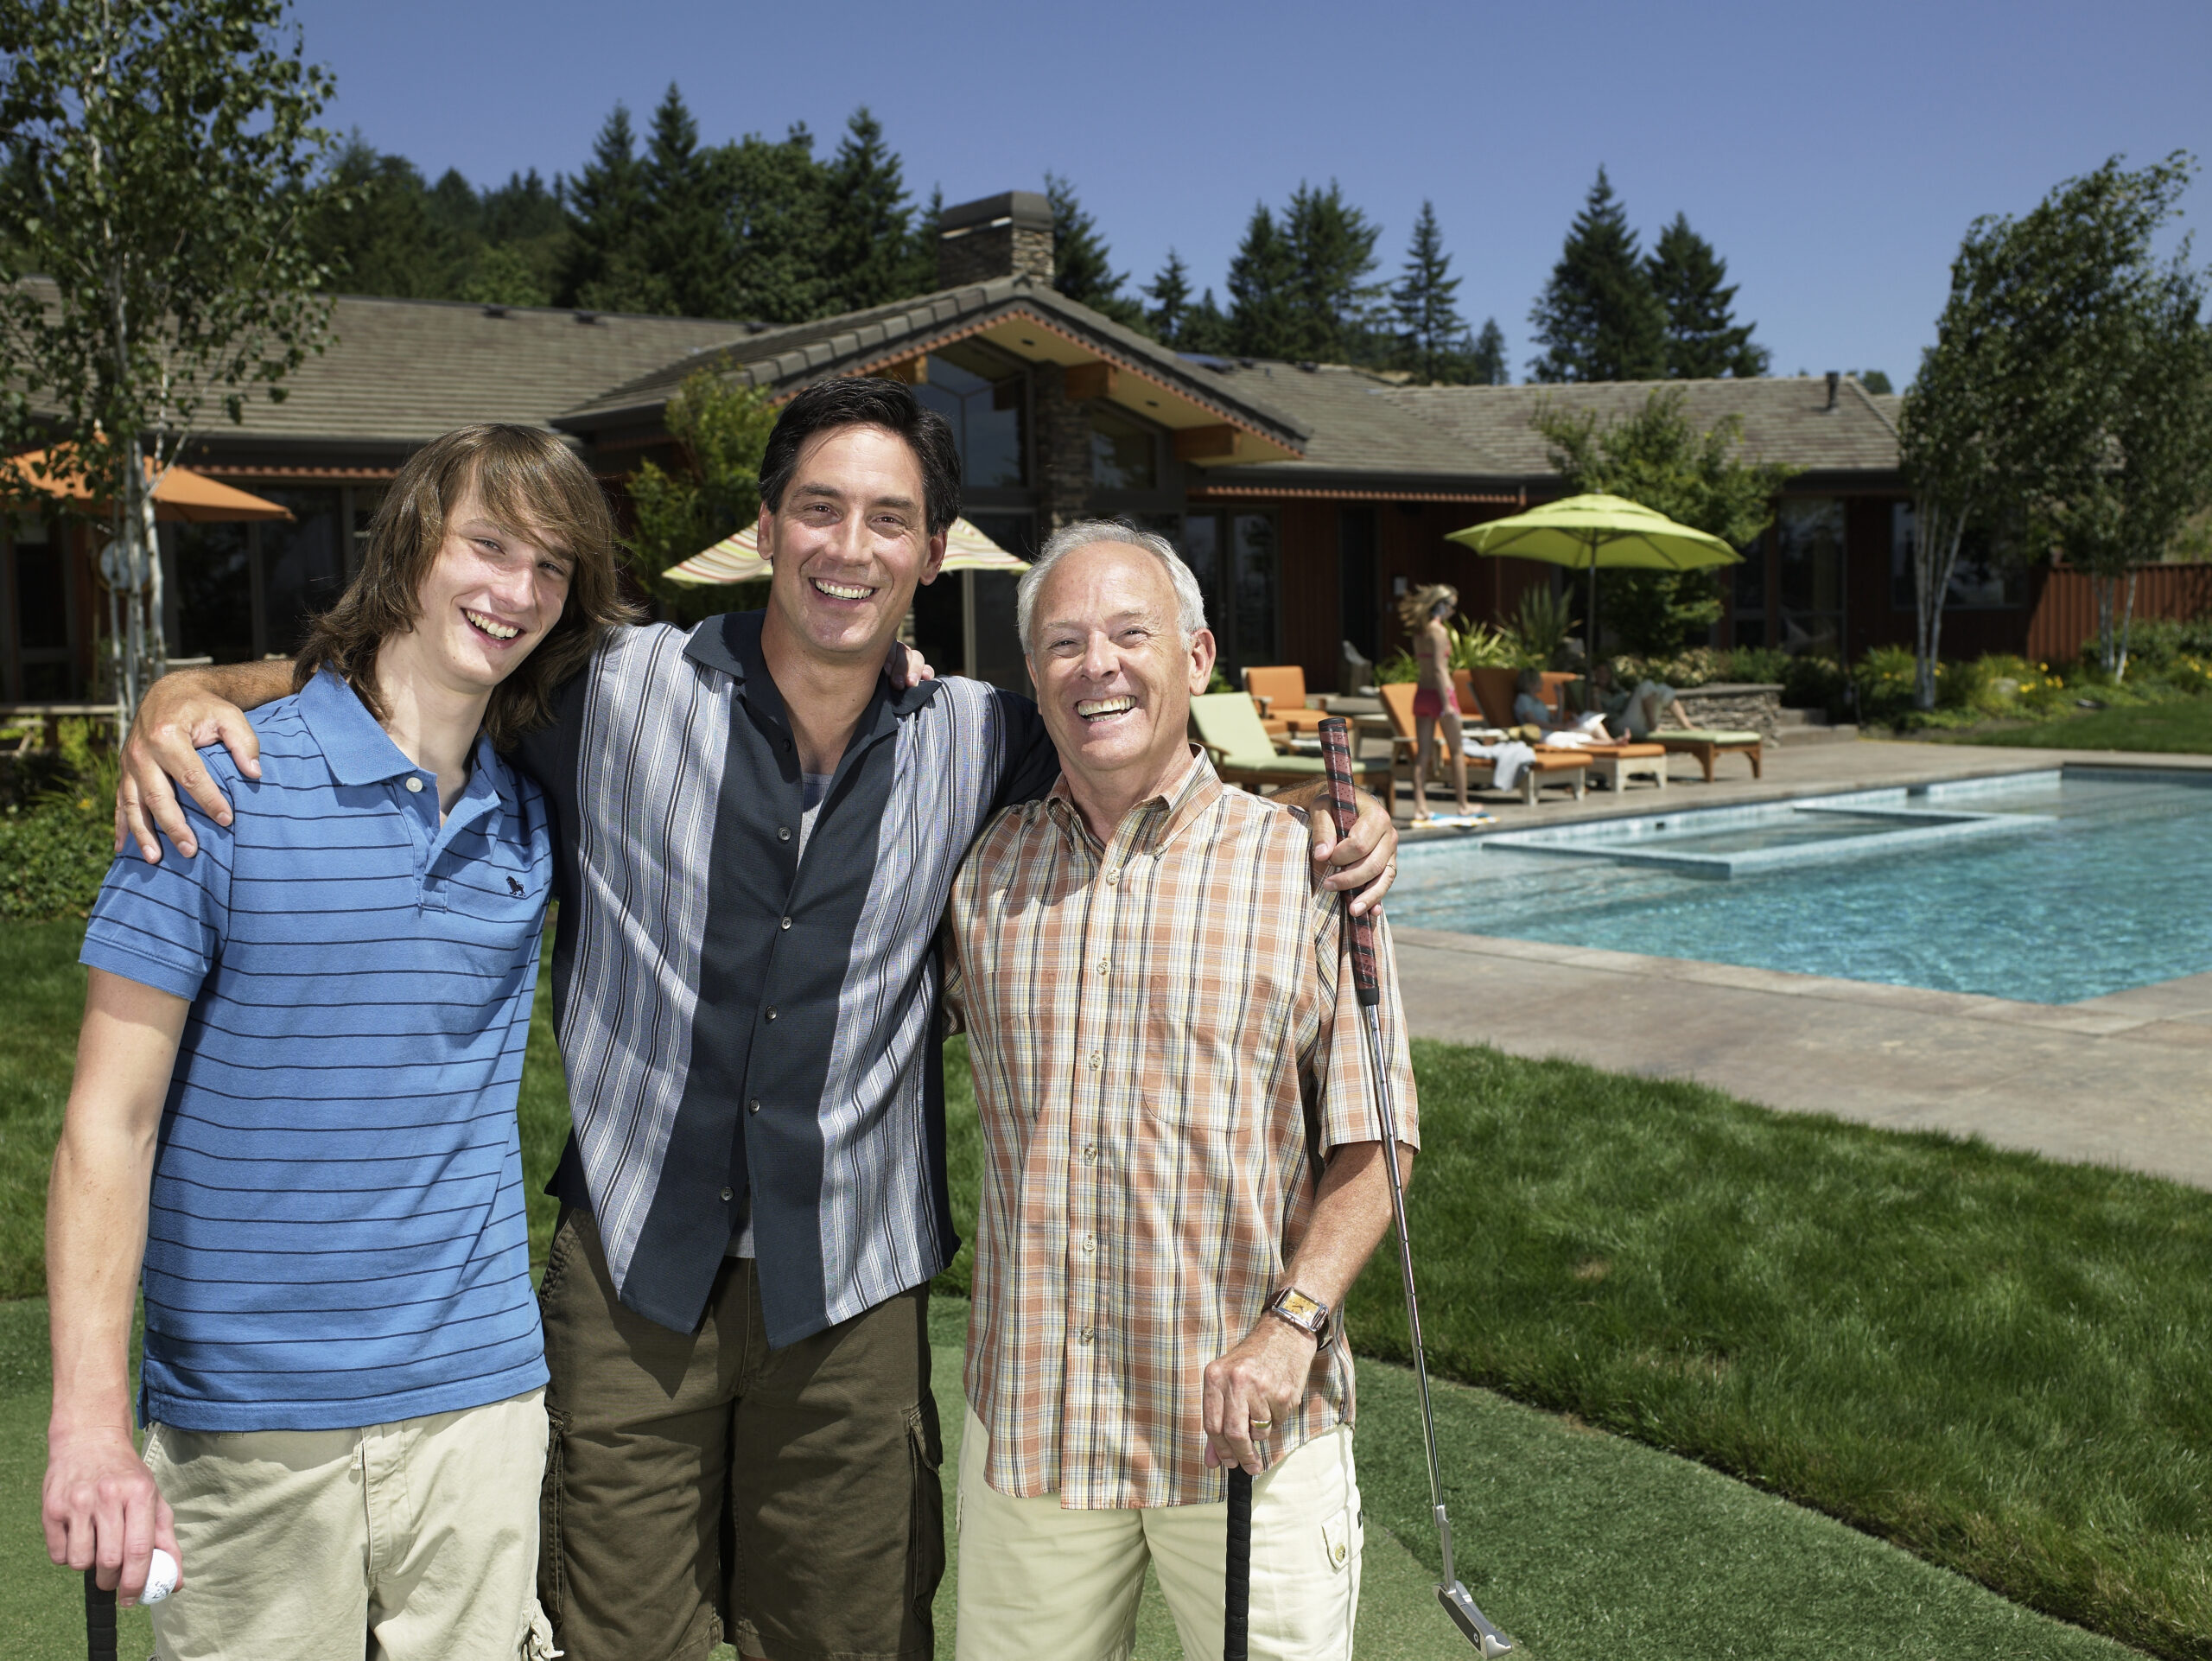 Grandfather, father and grandson with golf club, smiling, portrait